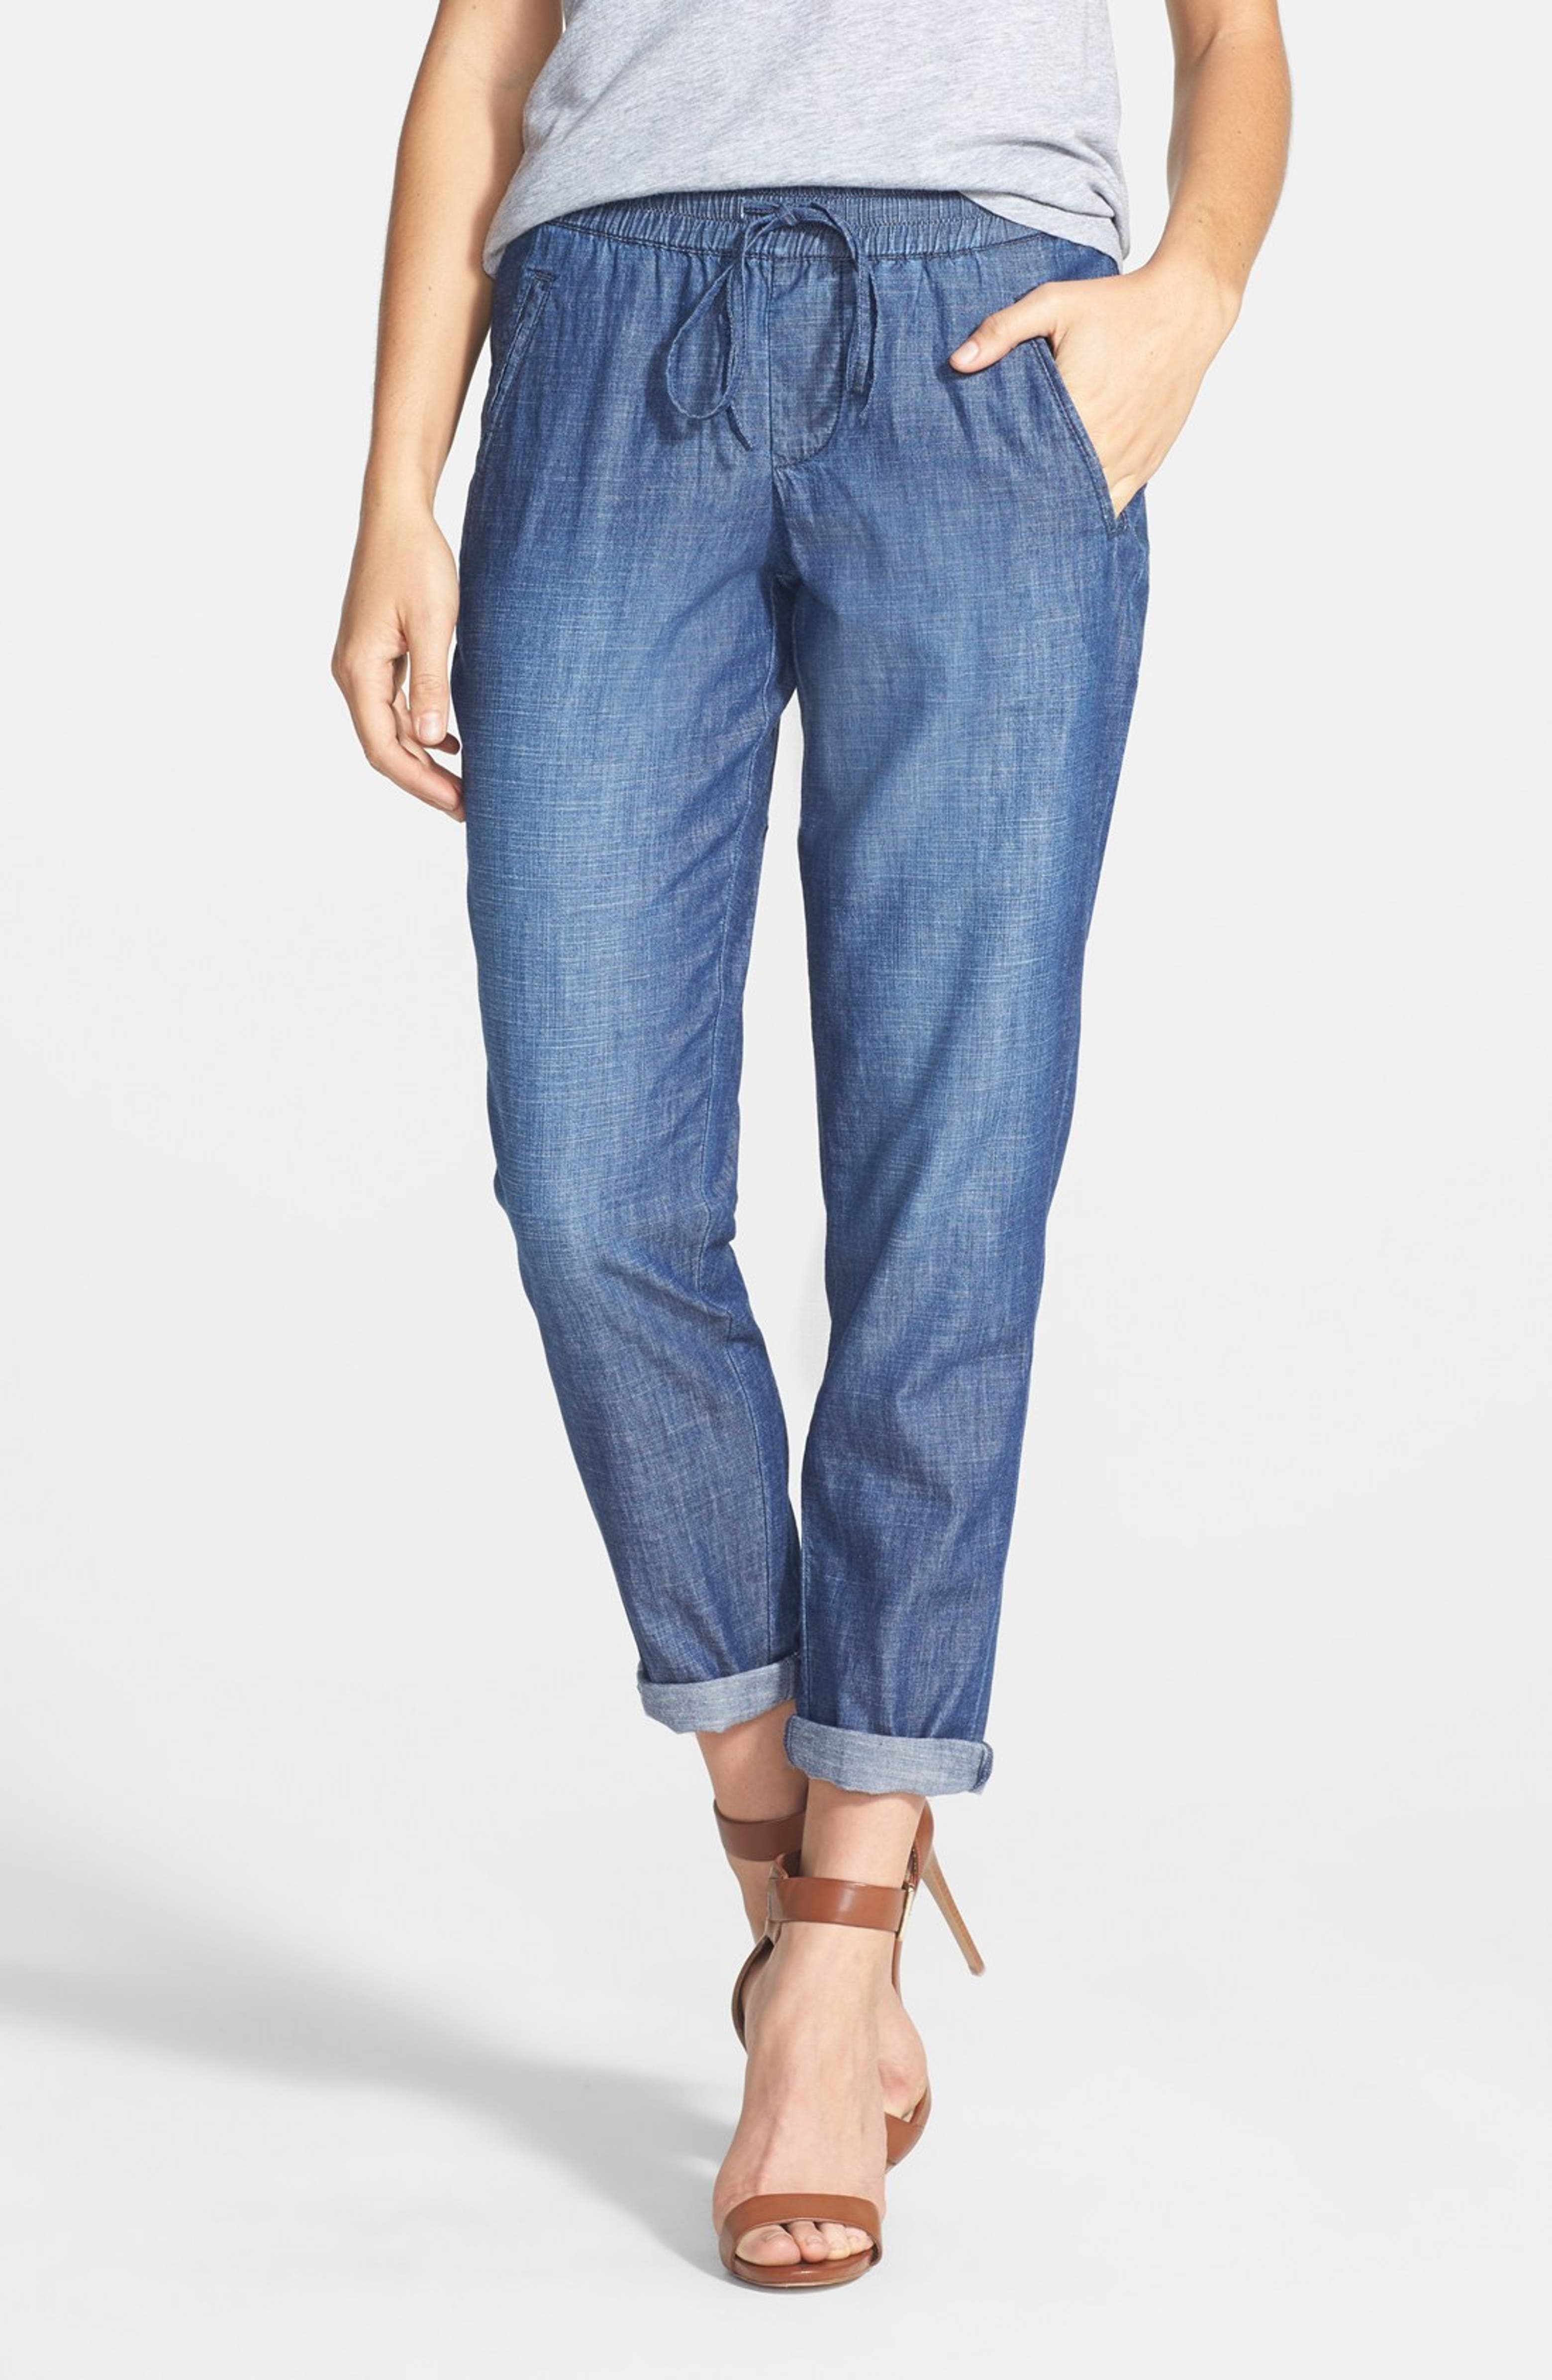 Christopher Blue 'Goldie' Chambray Drawstring Pants | Nordstrom